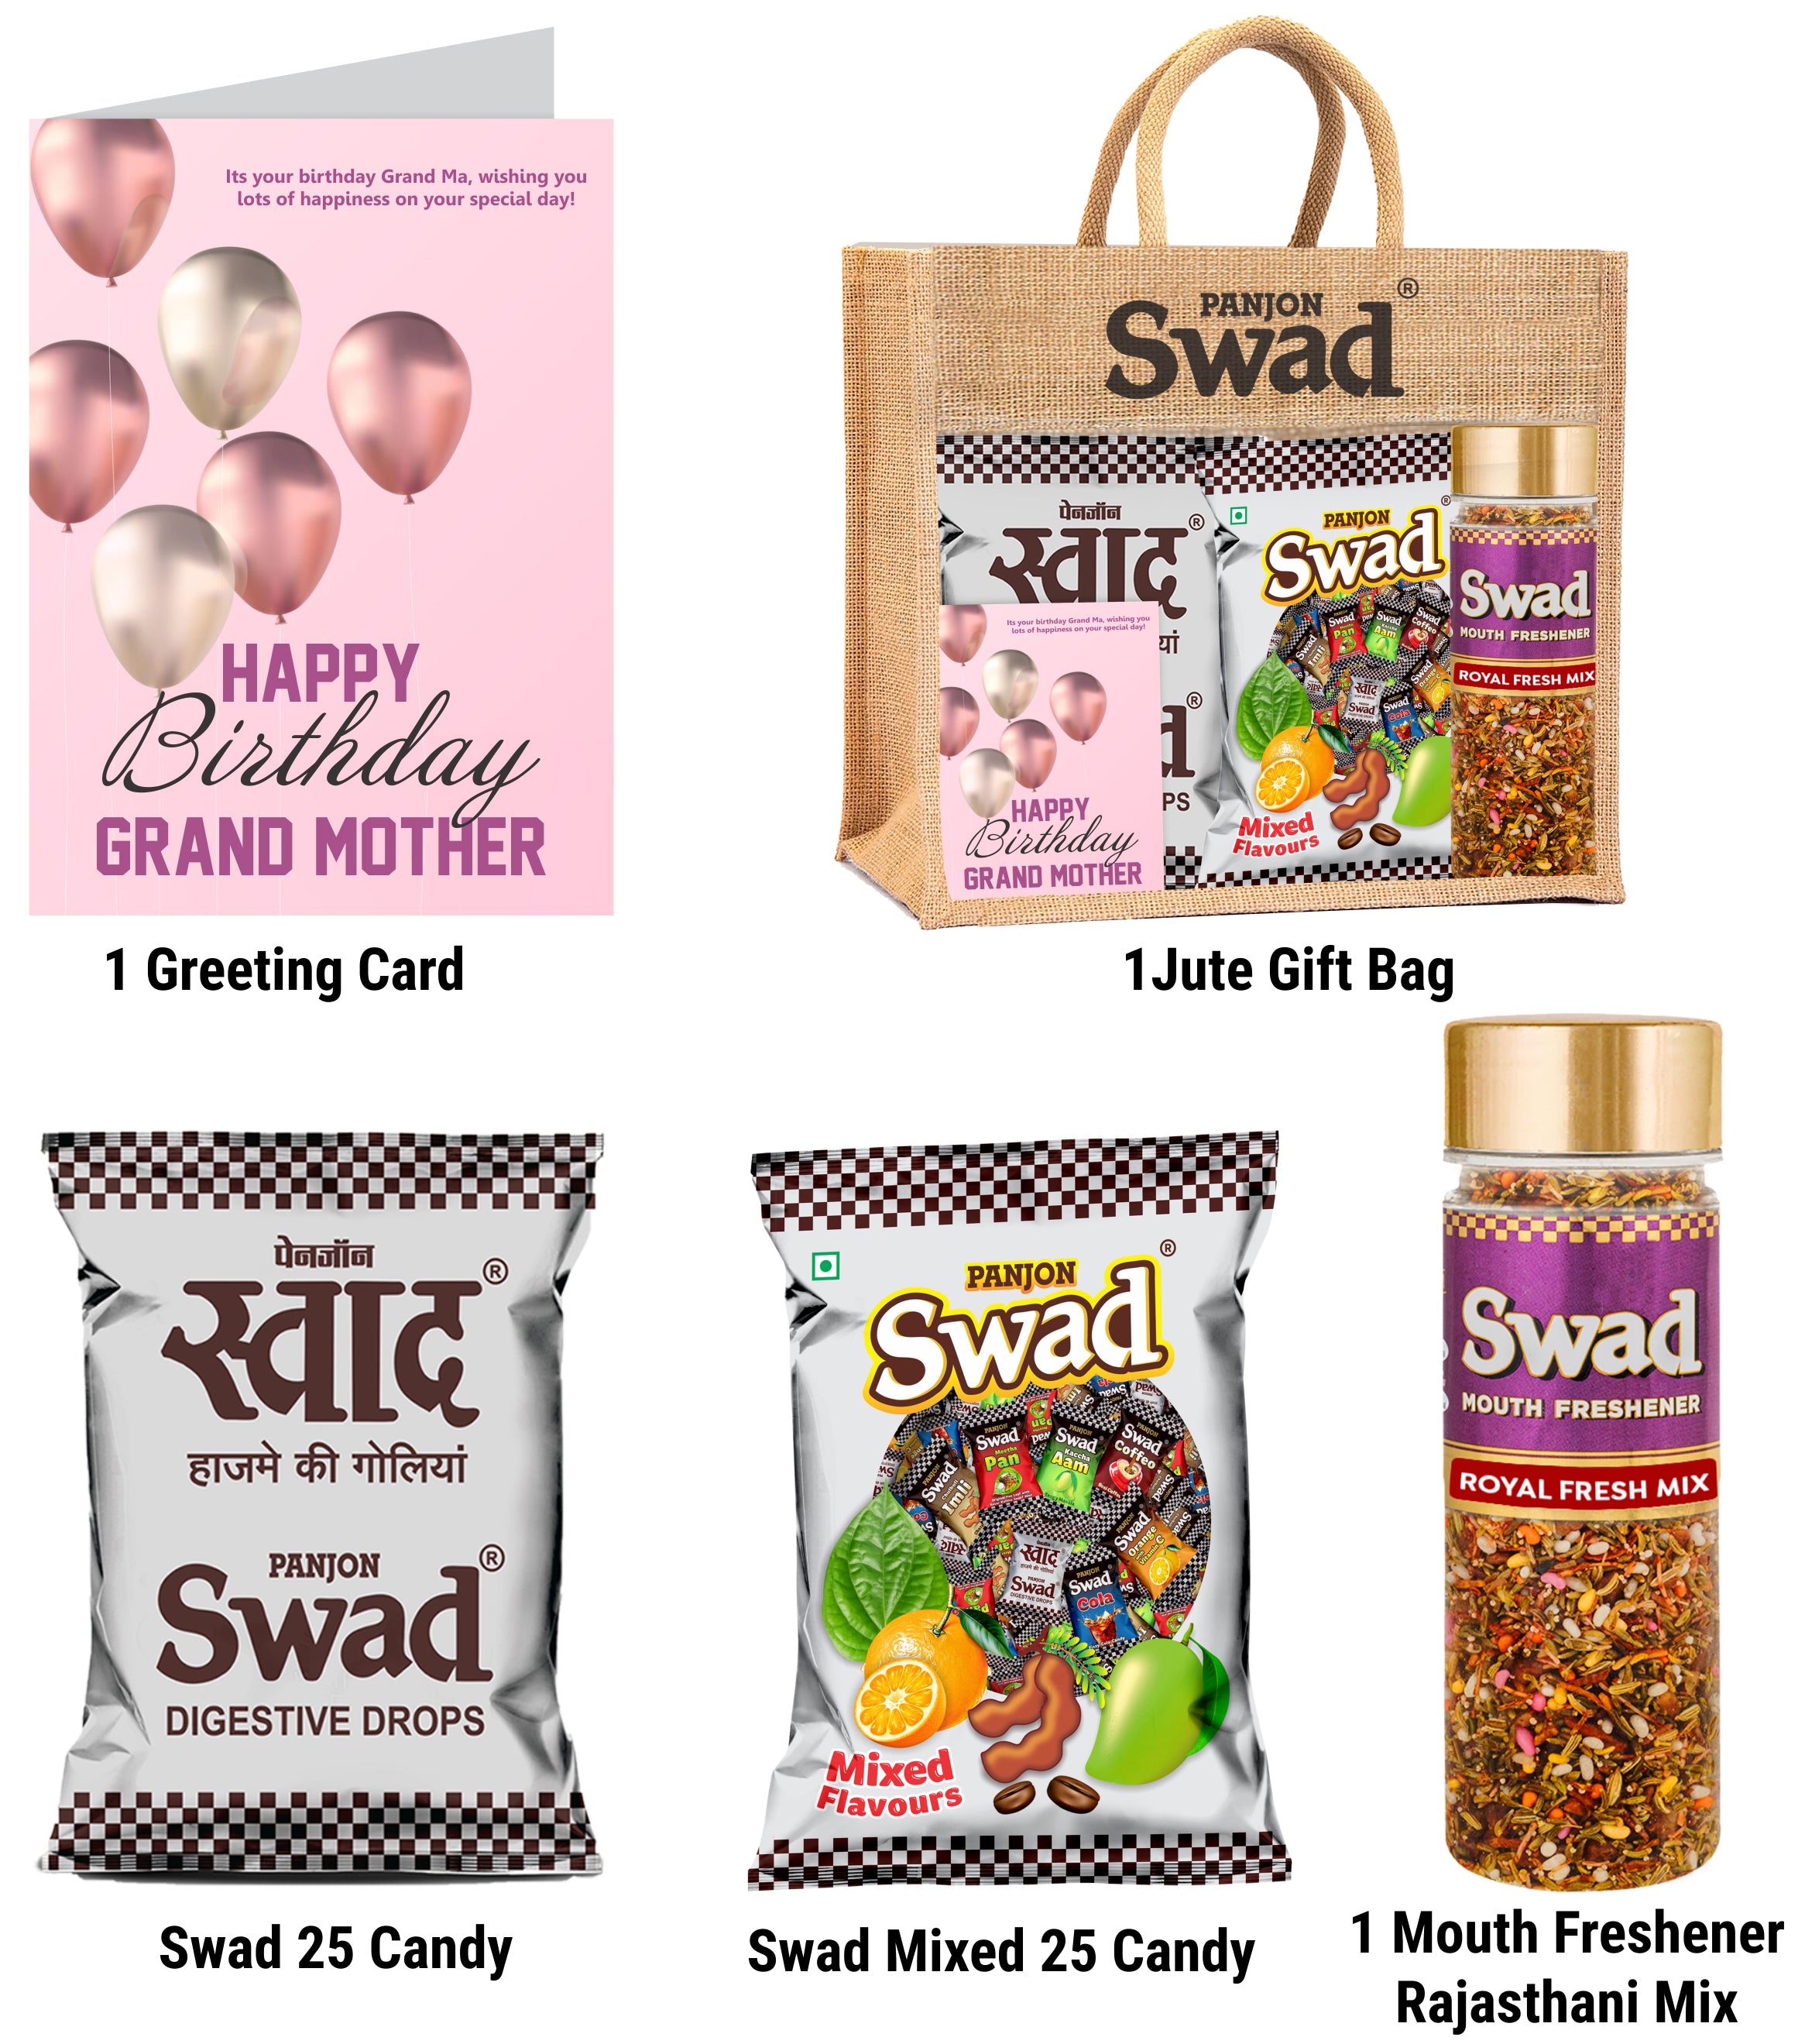 Swad Happy Birthday Dadi Grand Mom Gift with Card (25 Swad Candy, 25 Mixed Toffee, Royal Fresh Mix Mukhwas) in Jute Bag